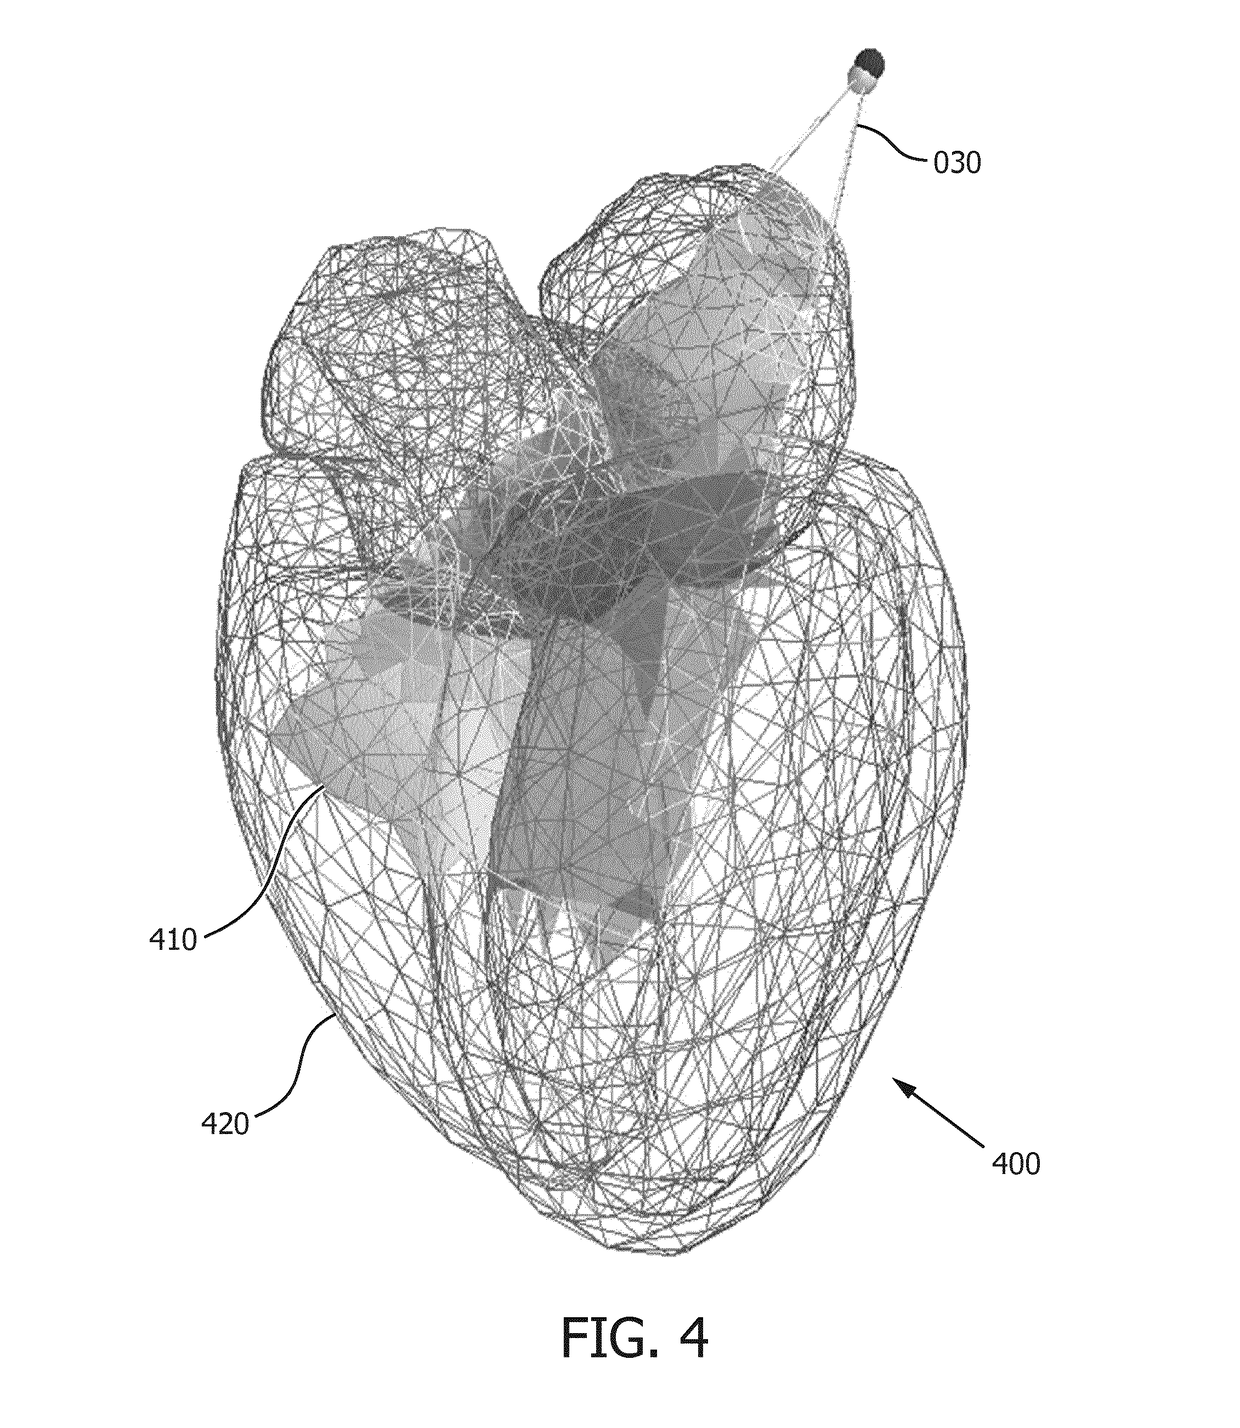 Model-based segmentation of an anatomical structure